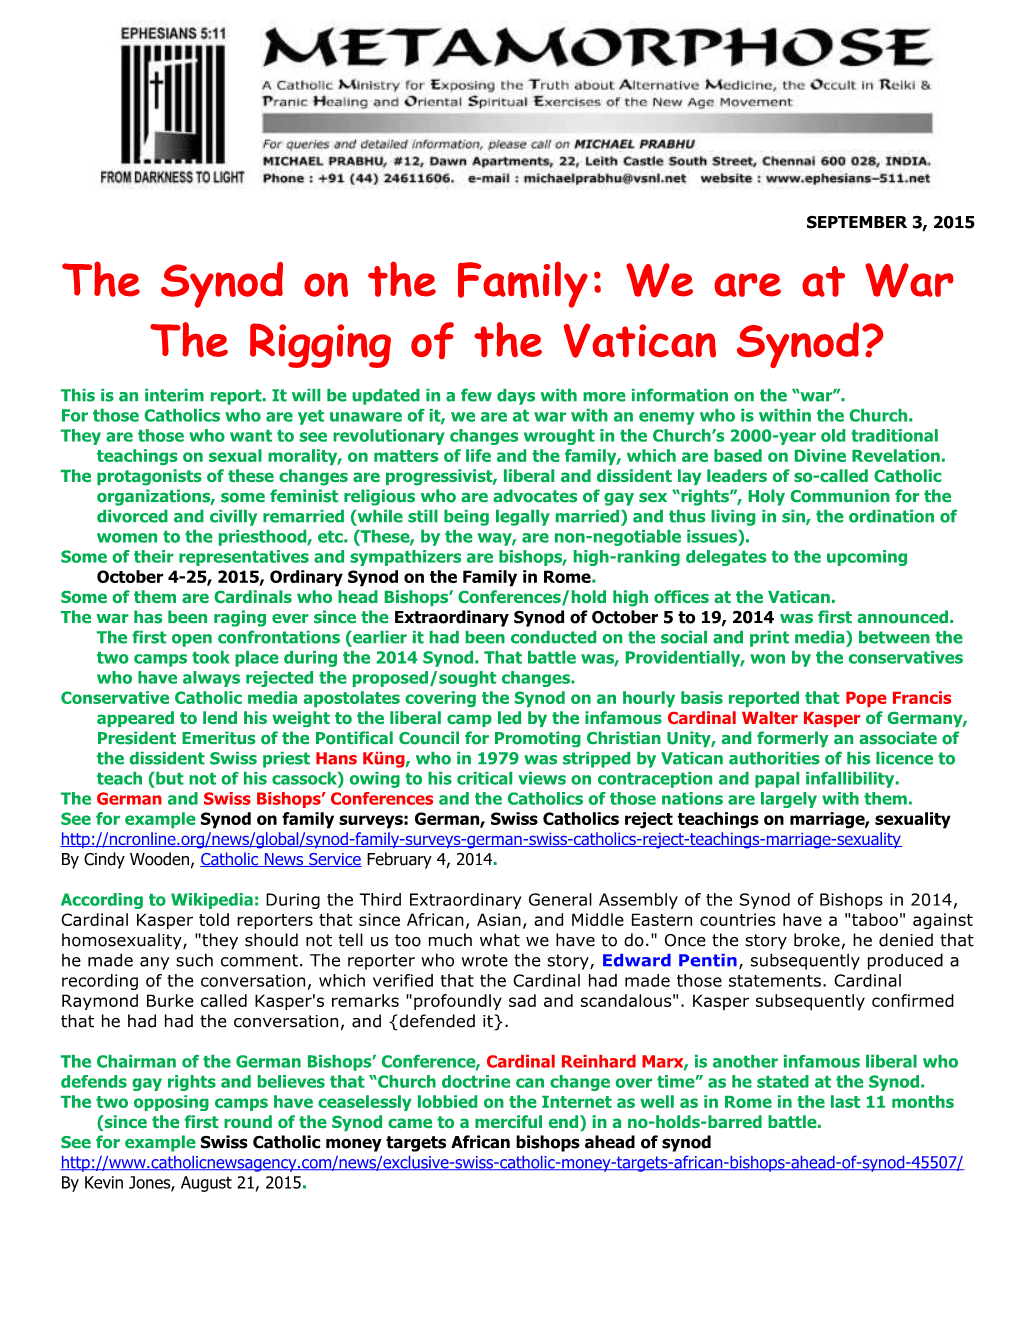 The Synod on the Family: We Are at War